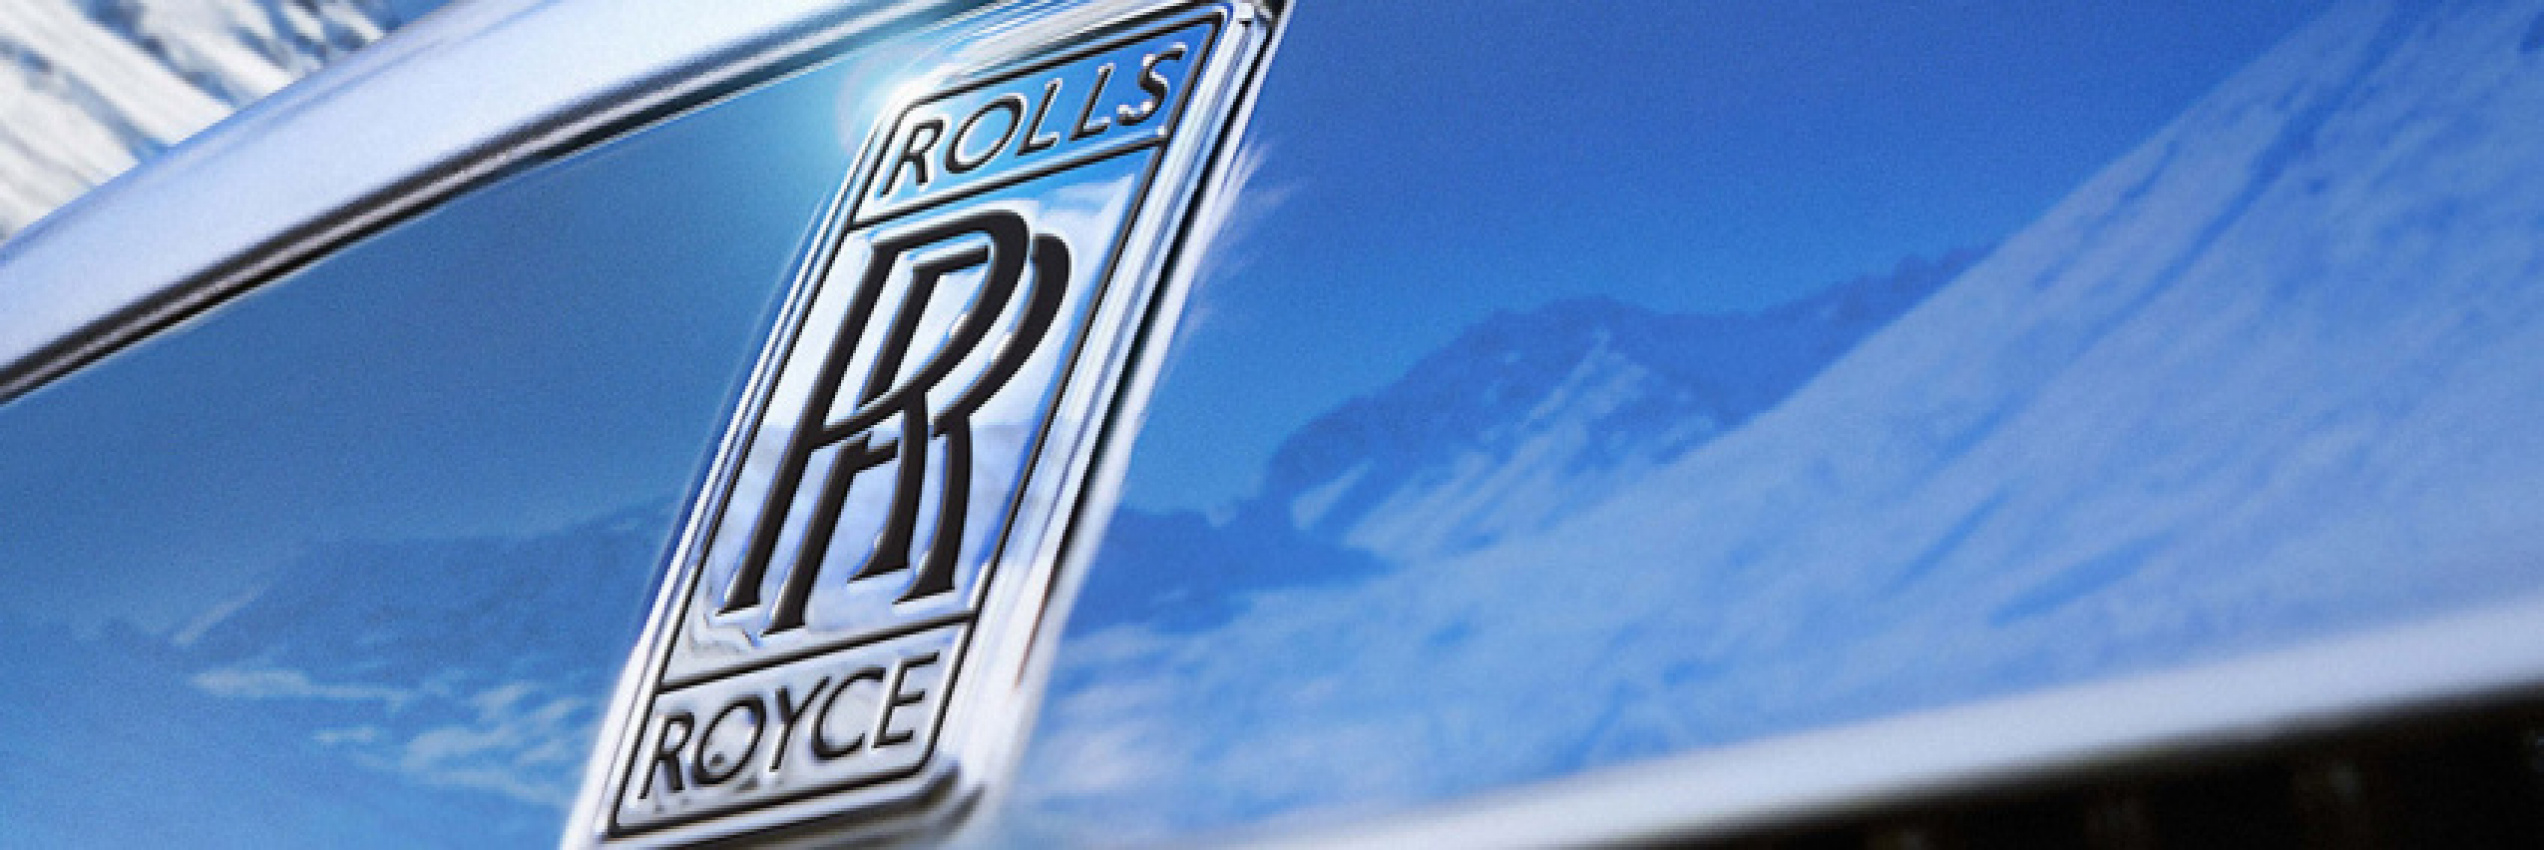 autos, cars, rolls-royce, rolls-royce designs the impossible!